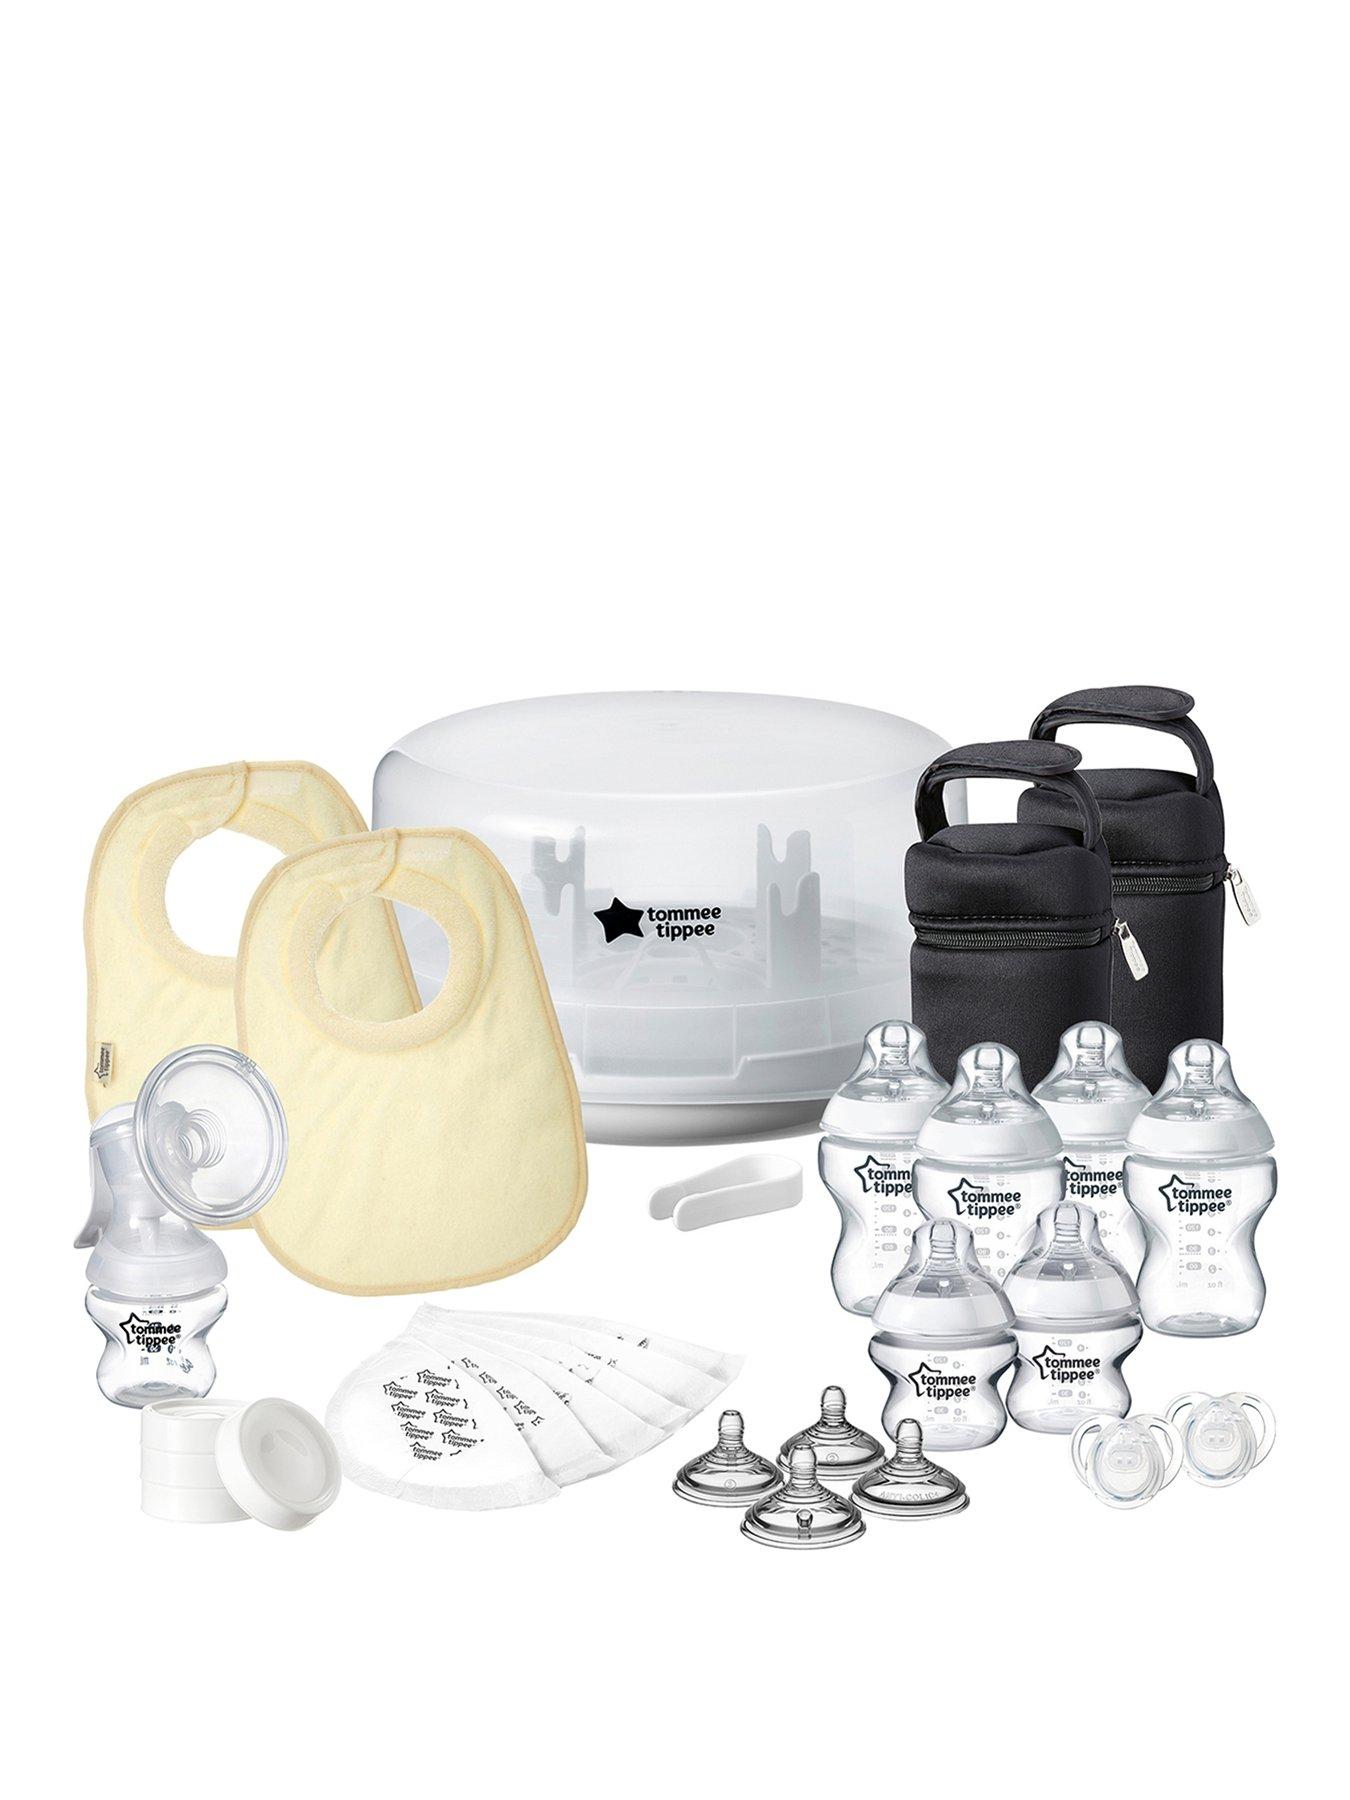 Tommee Tippee Closer to Nature Microwave Steriliser and Breast Pump Set 